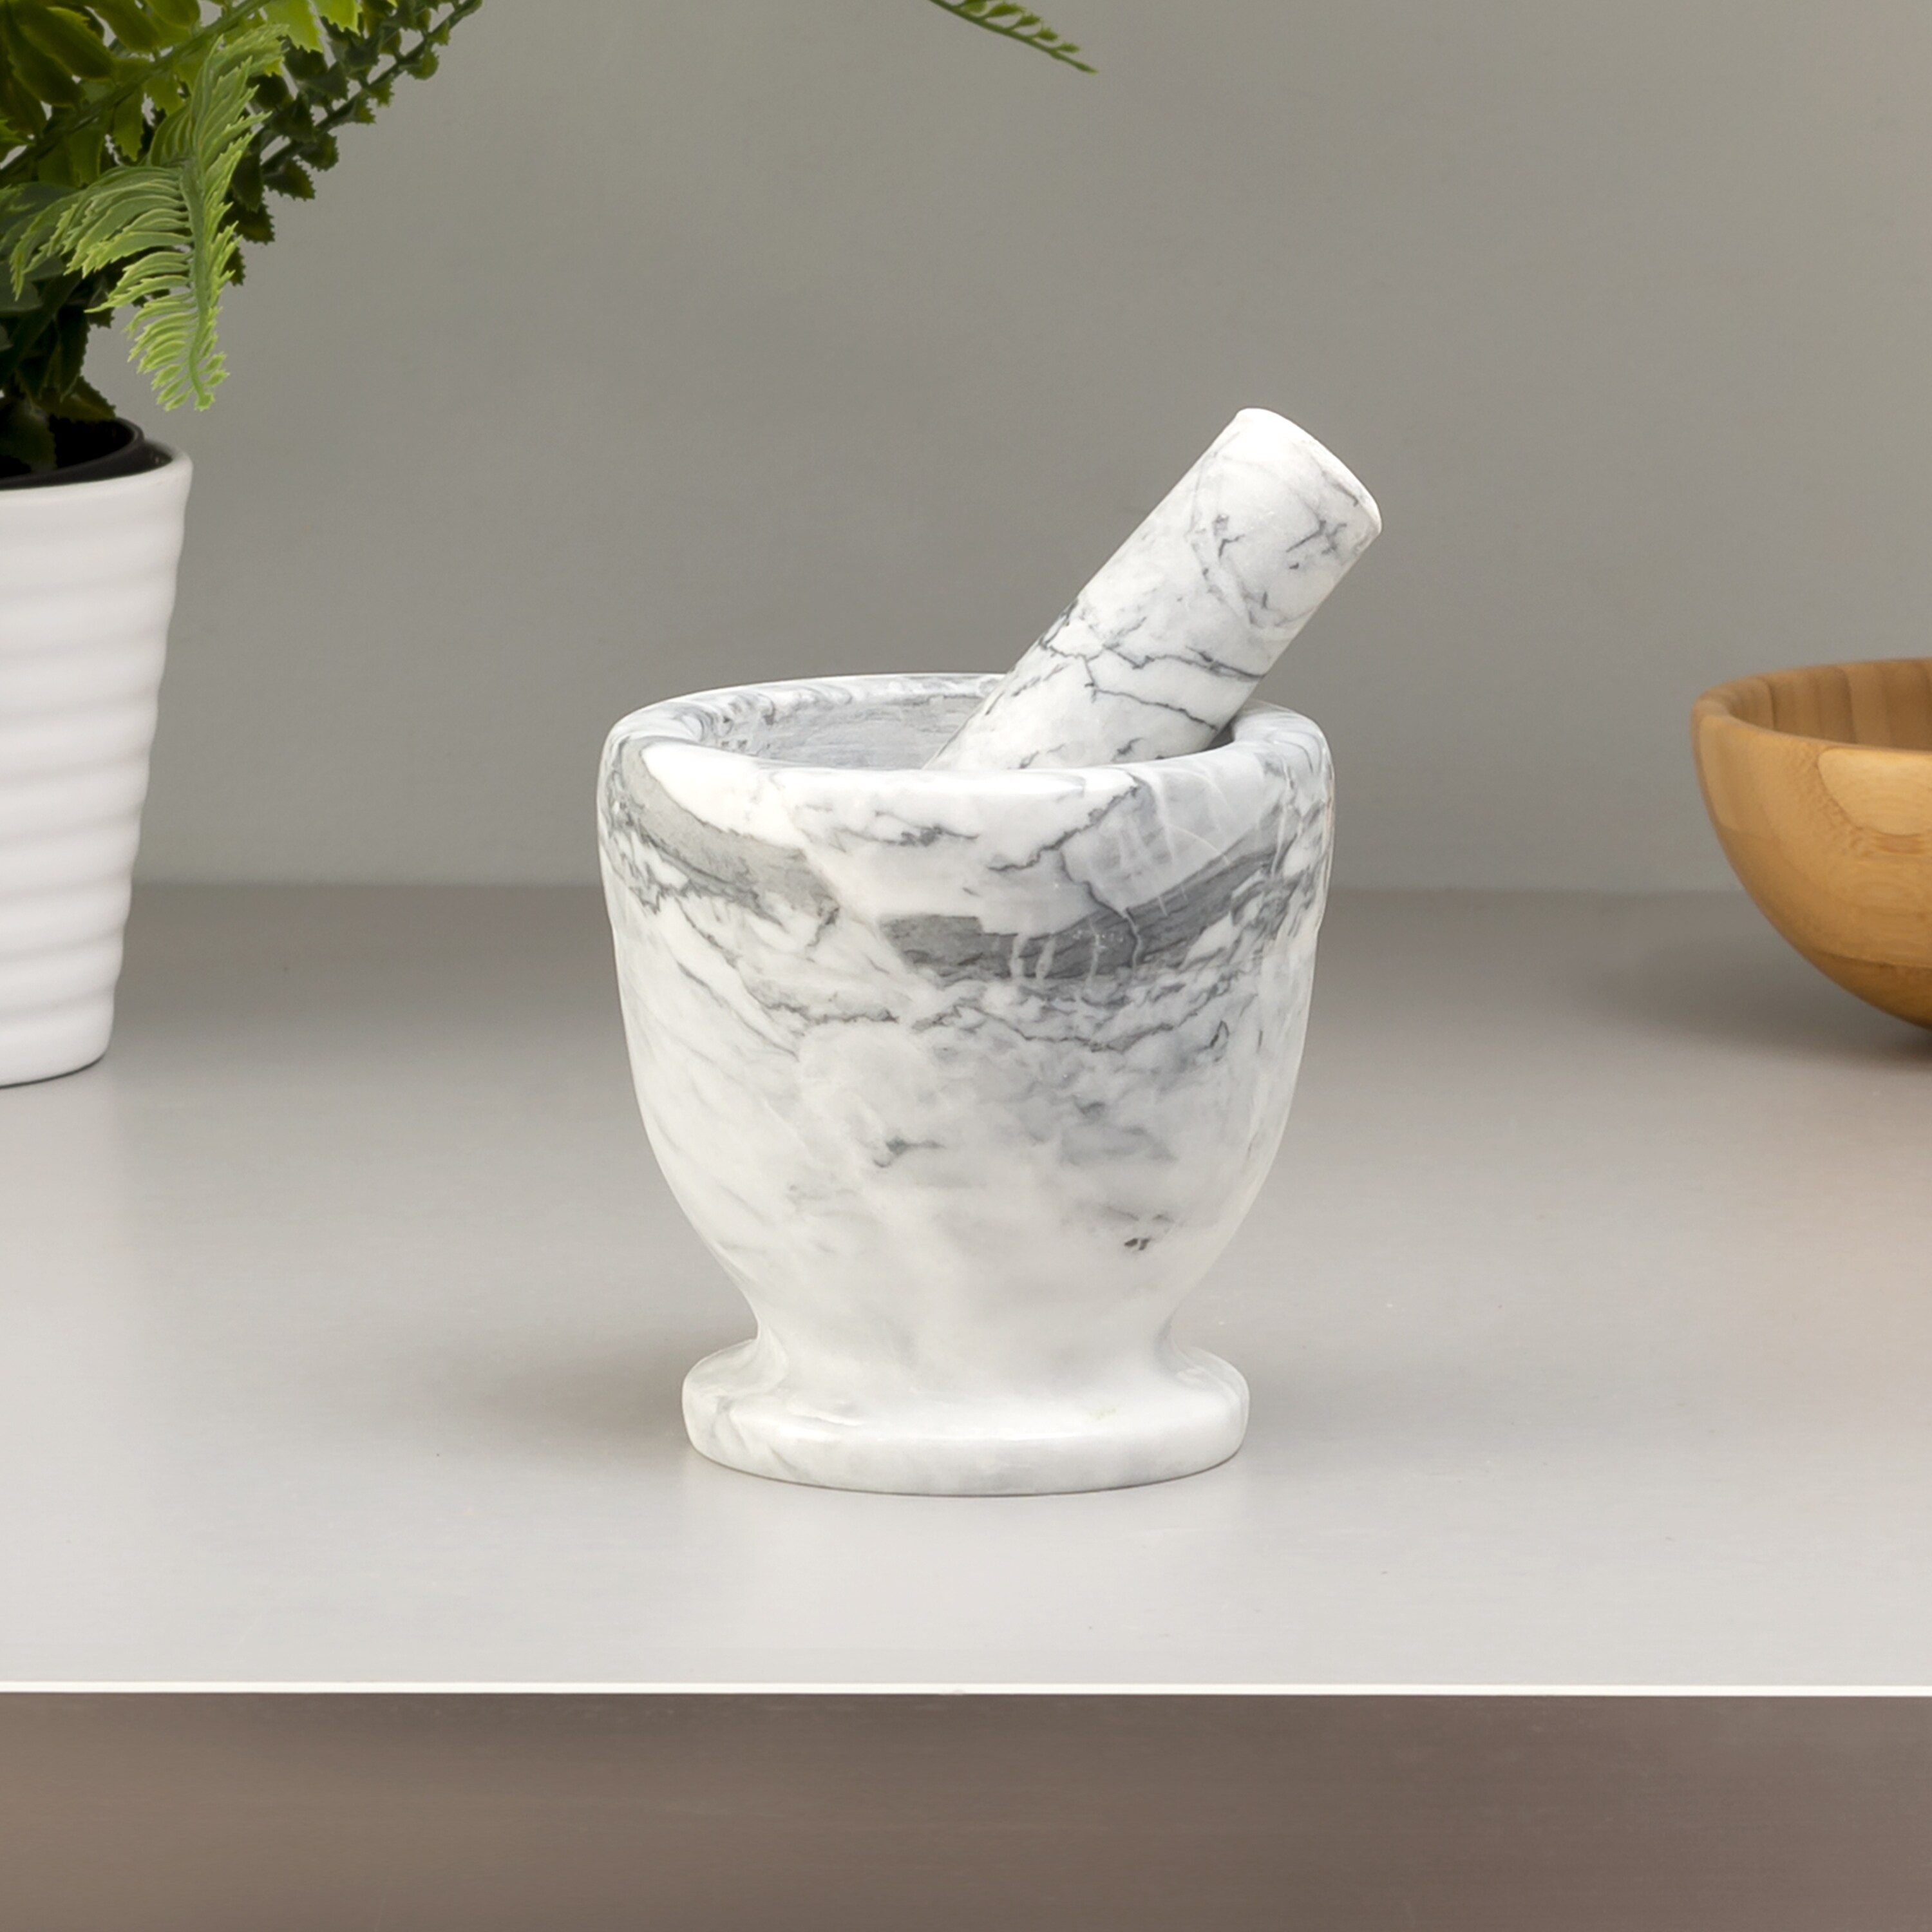 https://ak1.ostkcdn.com/images/products/is/images/direct/ec95a7a44fc6fecd3c63fb5c288c795ffb740200/Premius-Marble-Mortar-and-Pestle.jpg